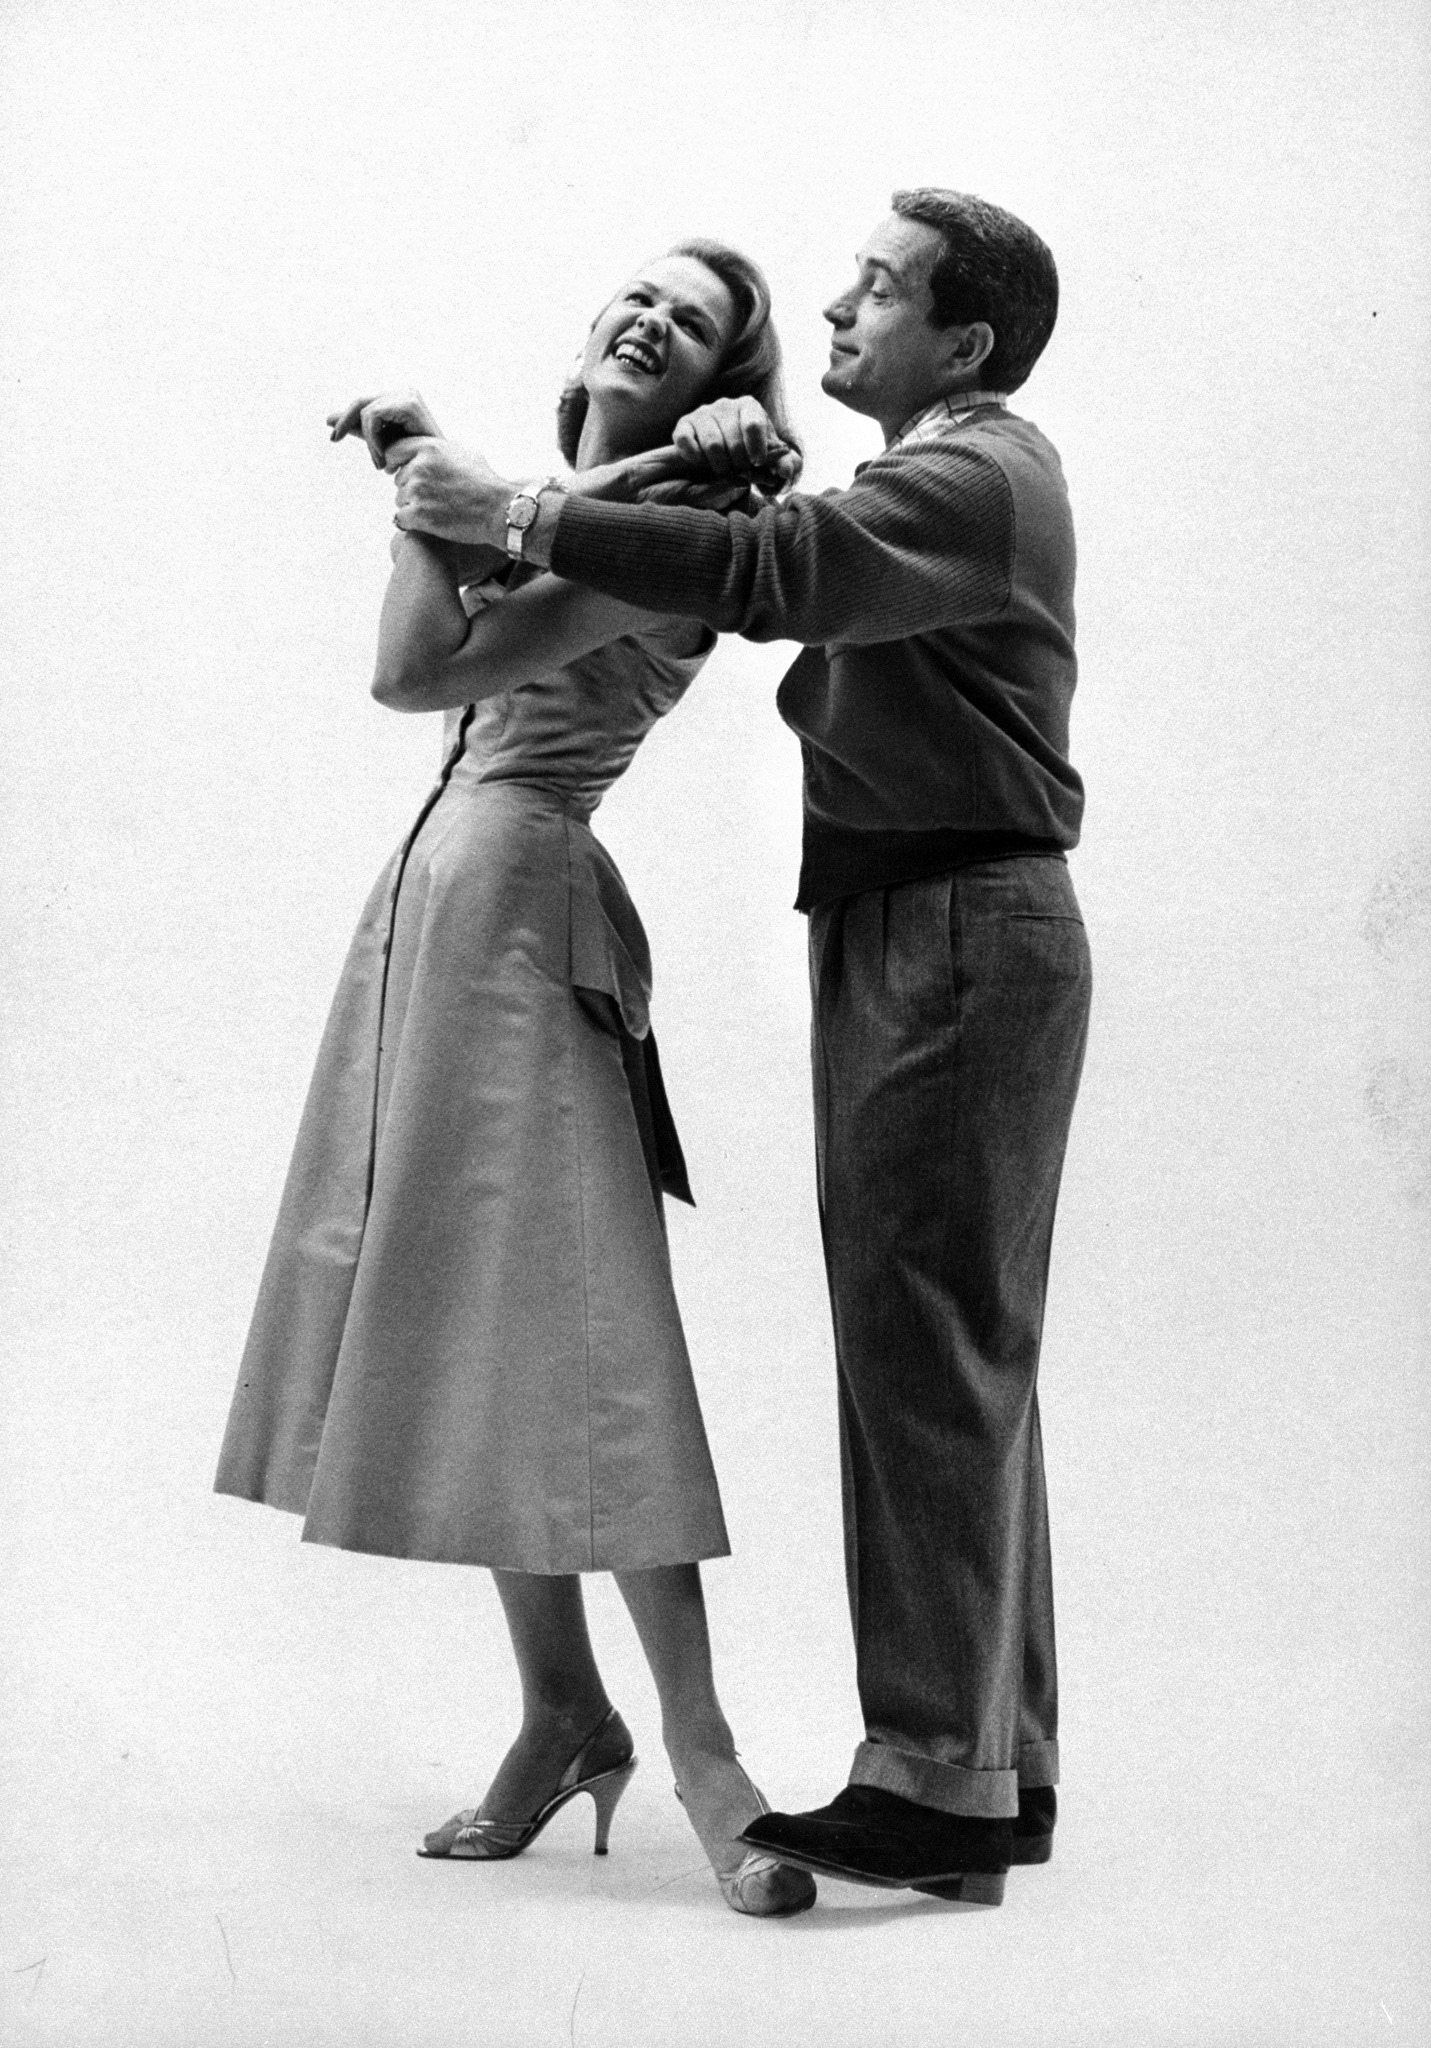 He must take her dancing. she would like him to take her to a movie or a meal, but she insists that he take her dancing. Perry obliges, but steps on partner's toes. This is because 69% of the girls said it was not important for a husband to be a good dancer. All she requires is that he try.